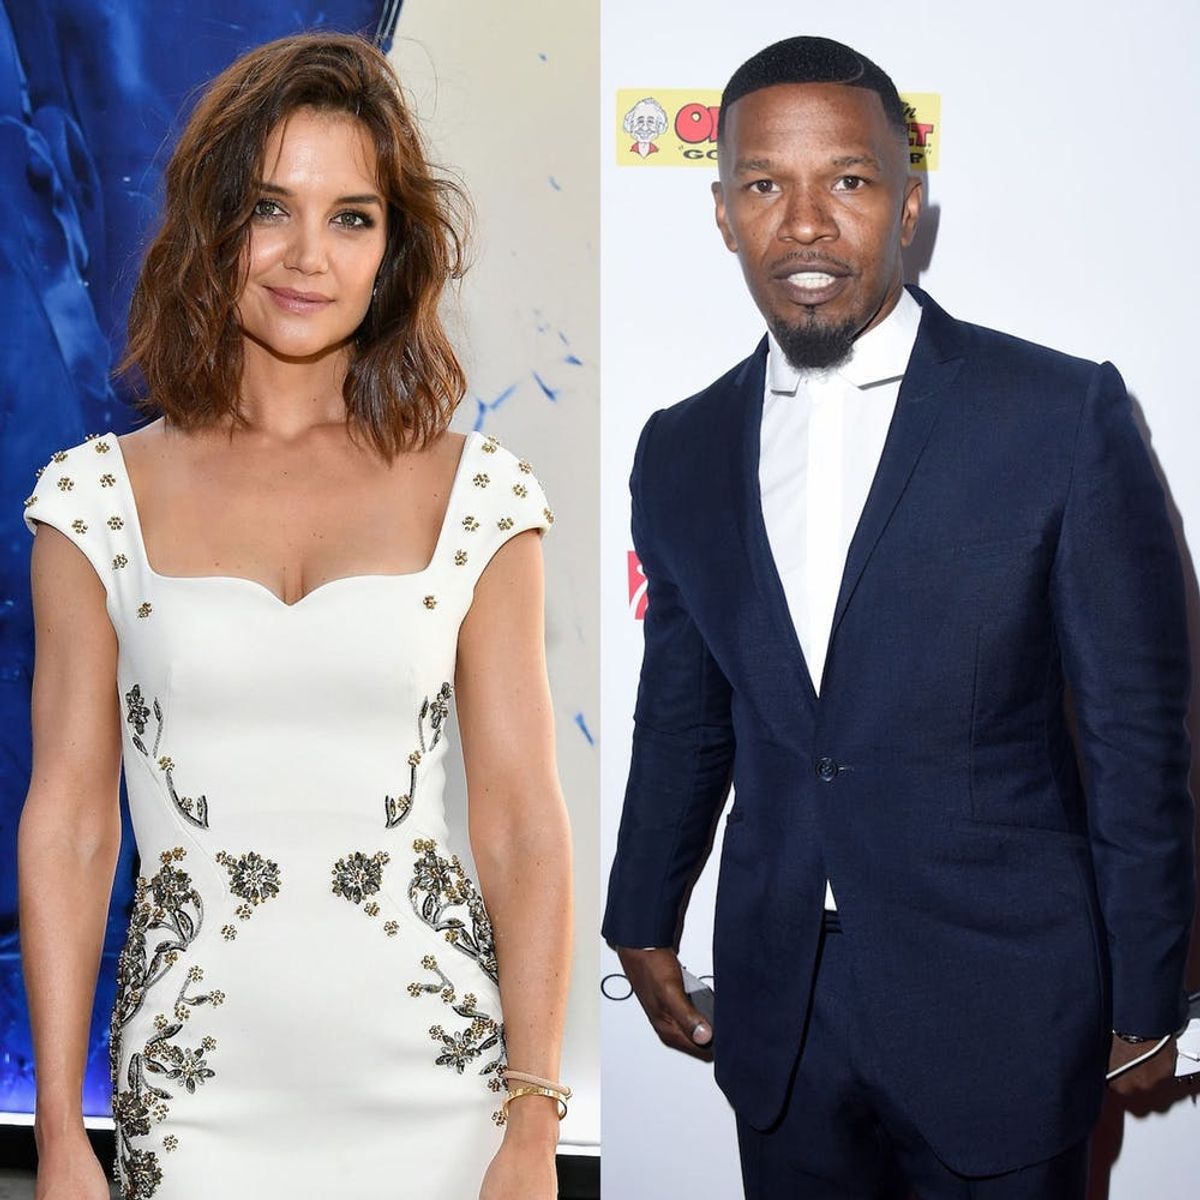 PDA Alert! Katie Holmes and Jamie Foxx Were Spotted Holding Hands on the Beach